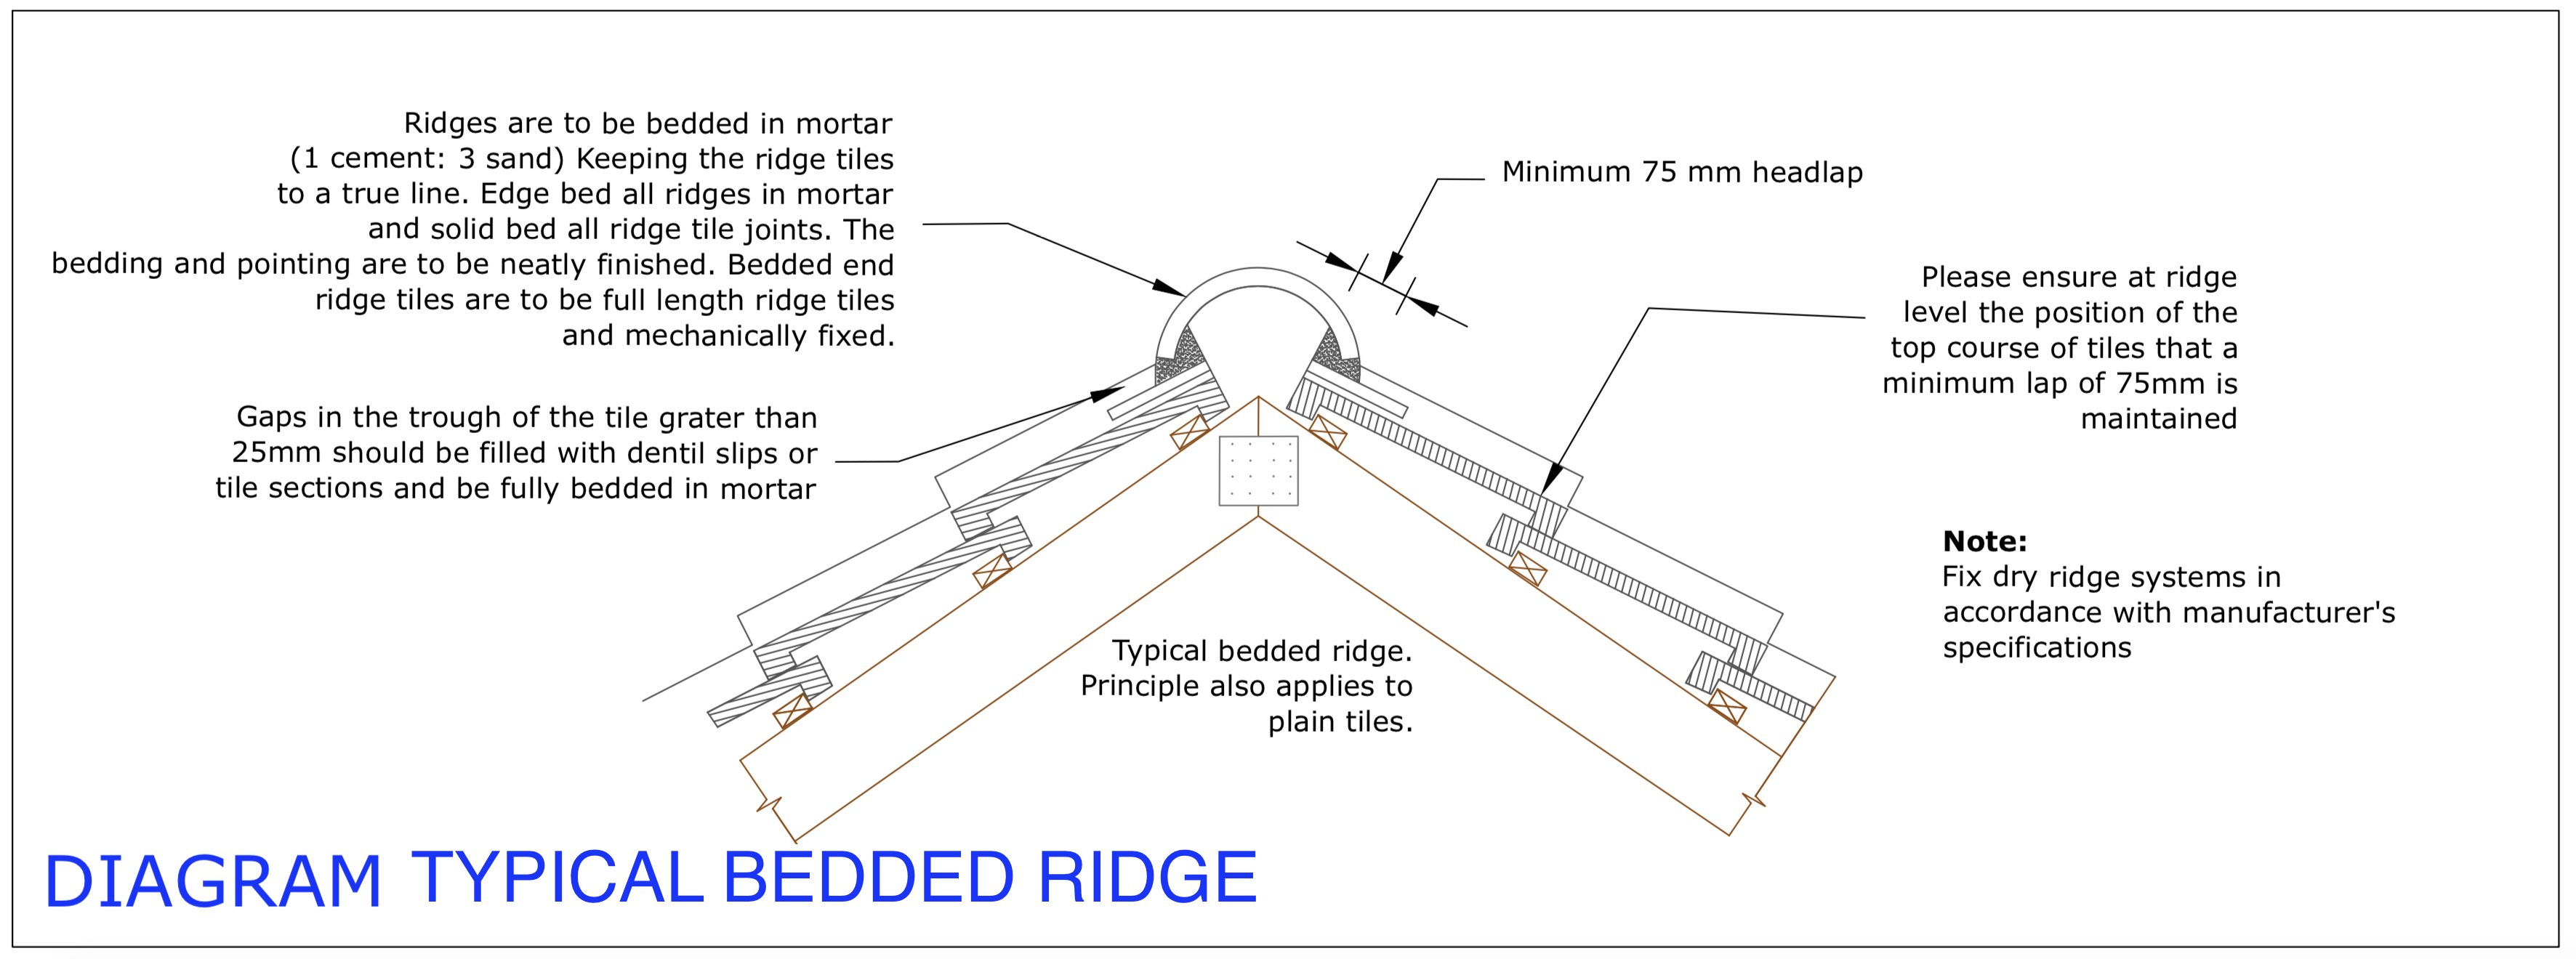 Diagram D91 - Typical bedded ridge